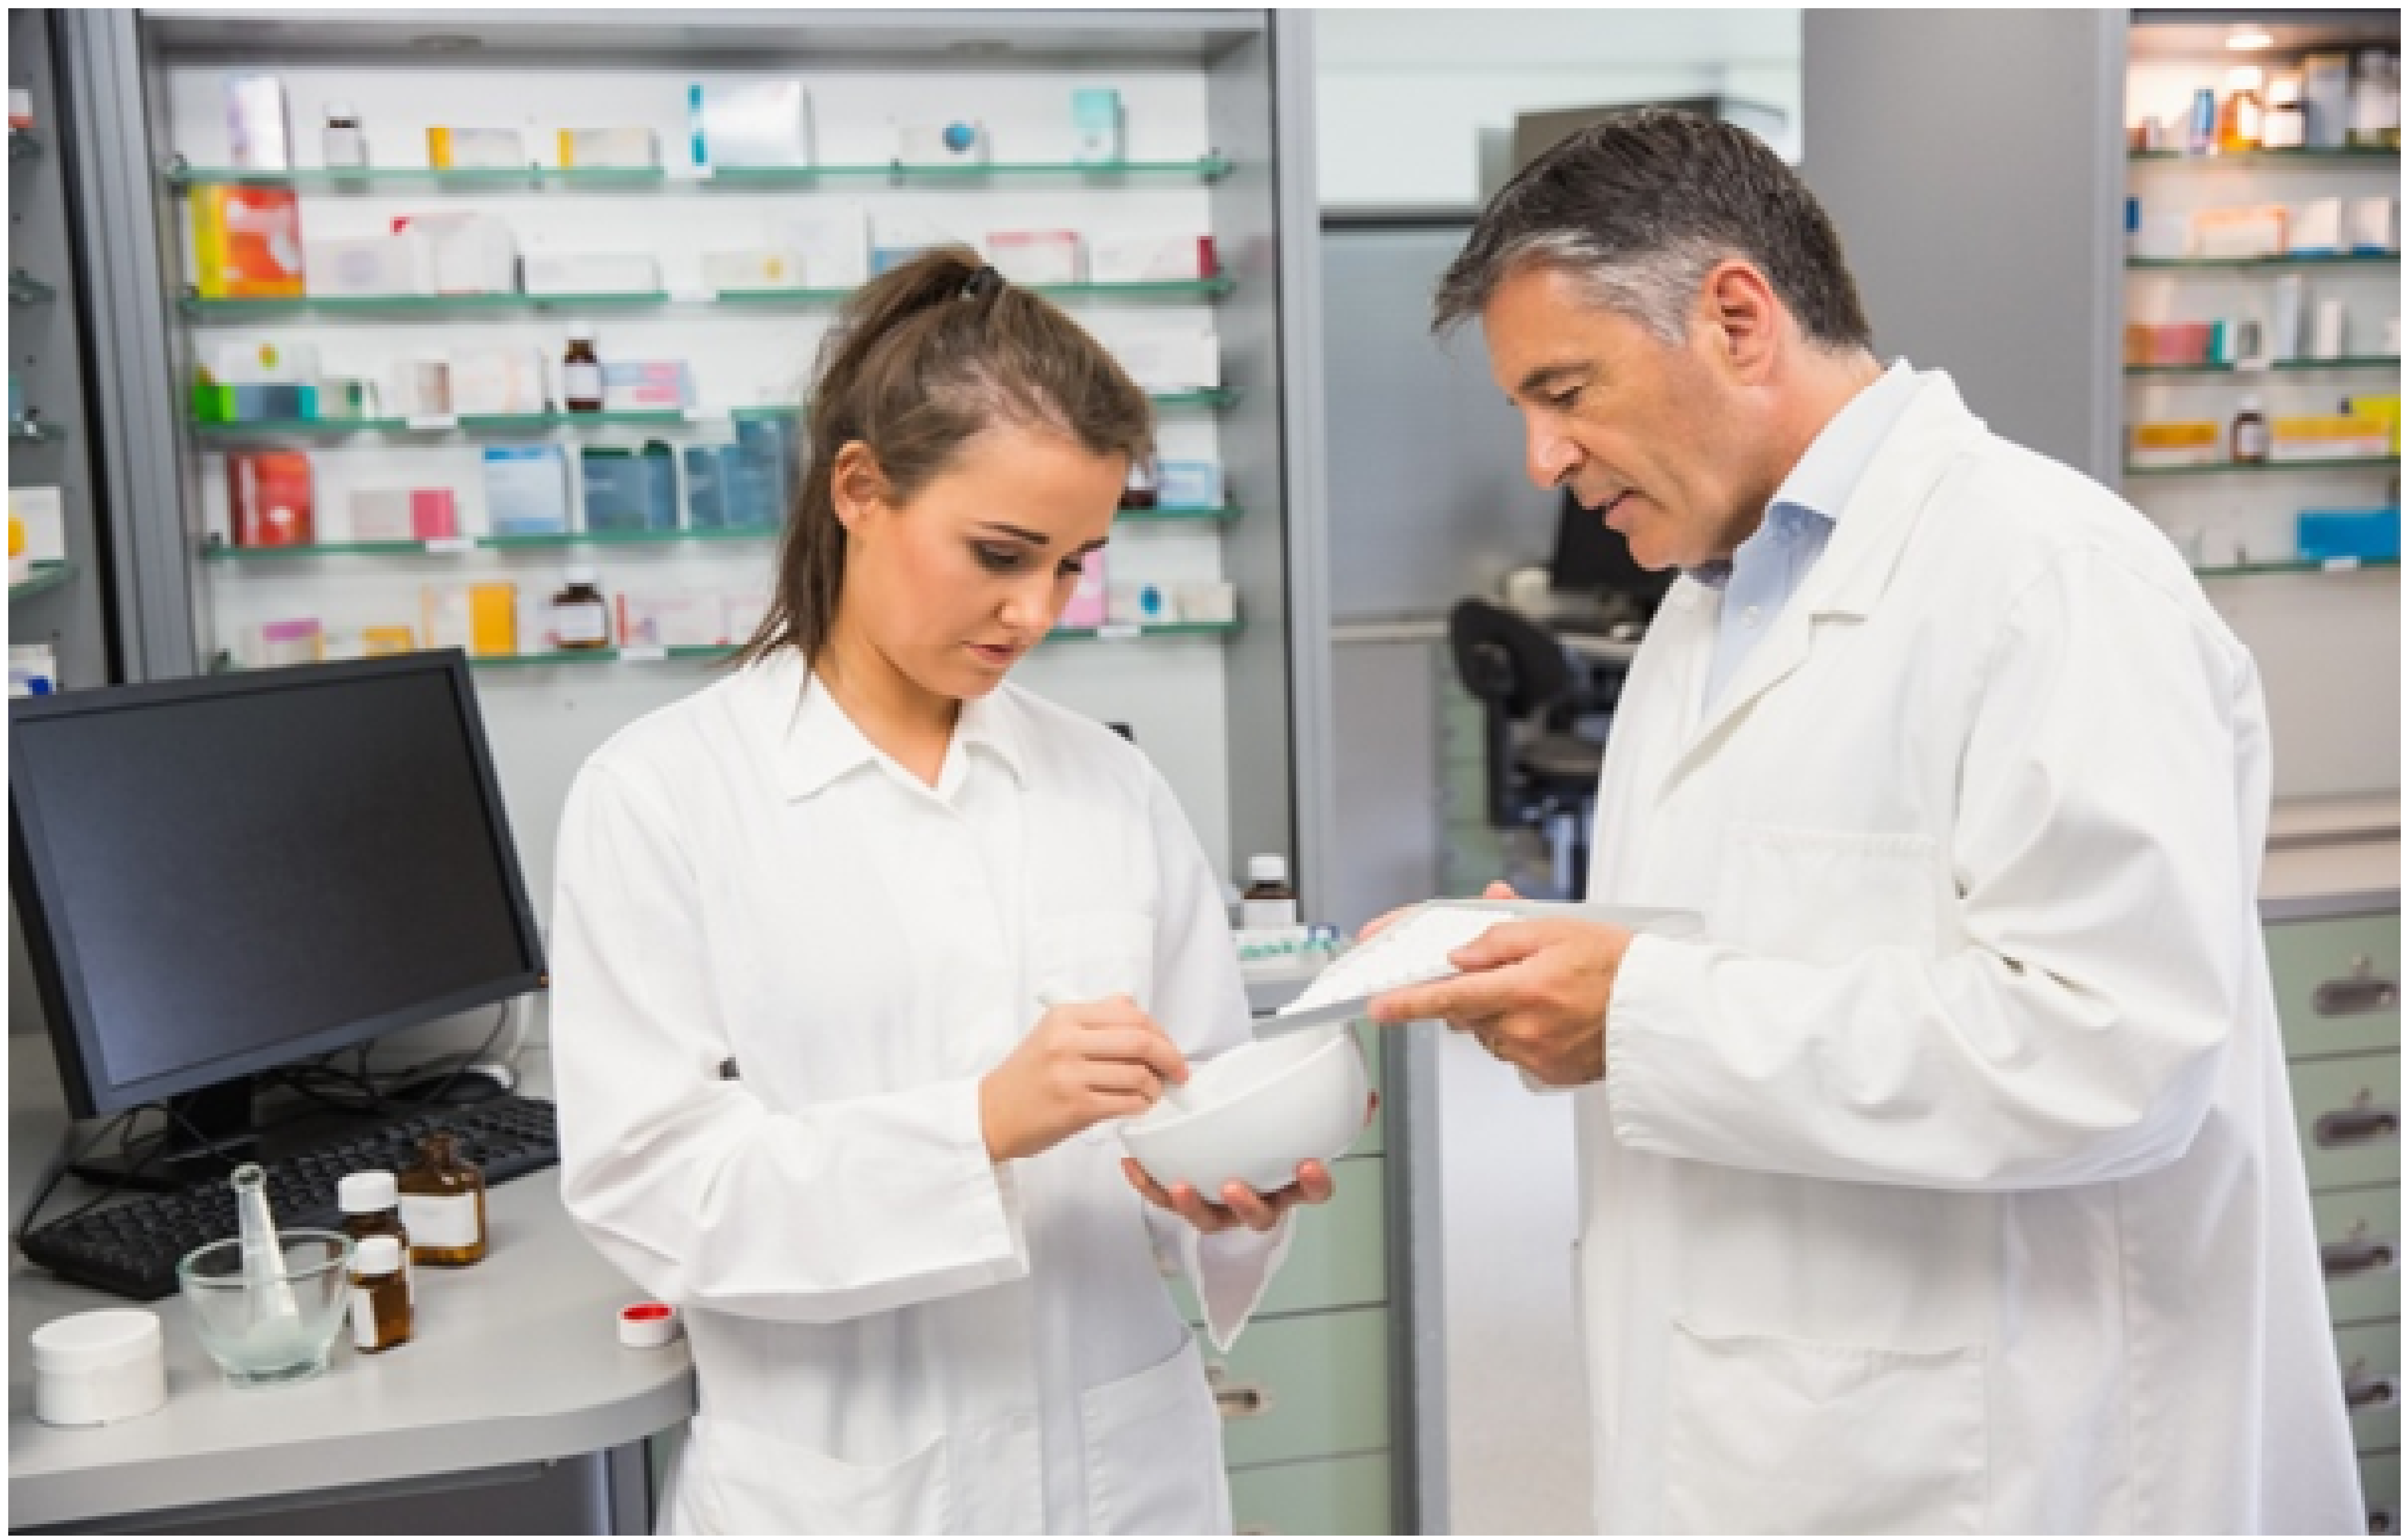 Can a Compounding Pharmacy in Toronto Help?